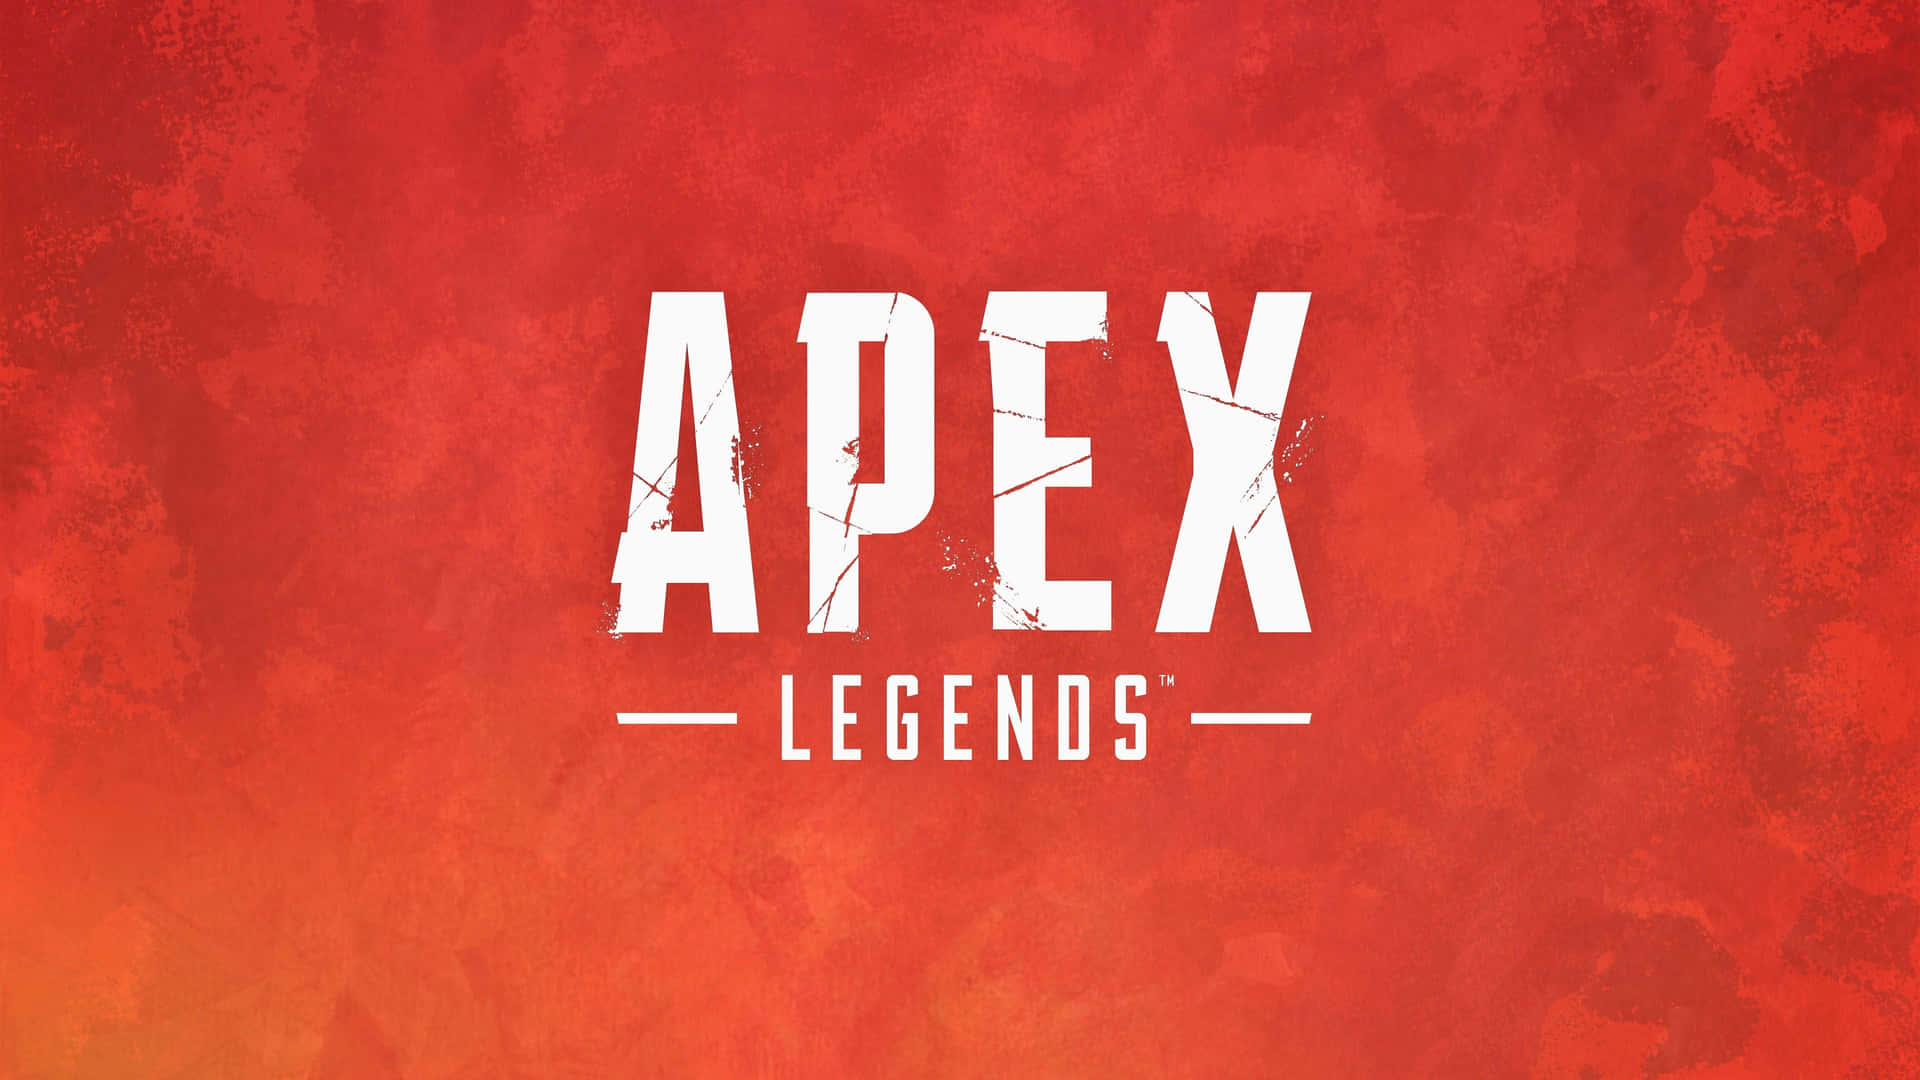 Dive into the adrenaline-filled world of Apex Legends